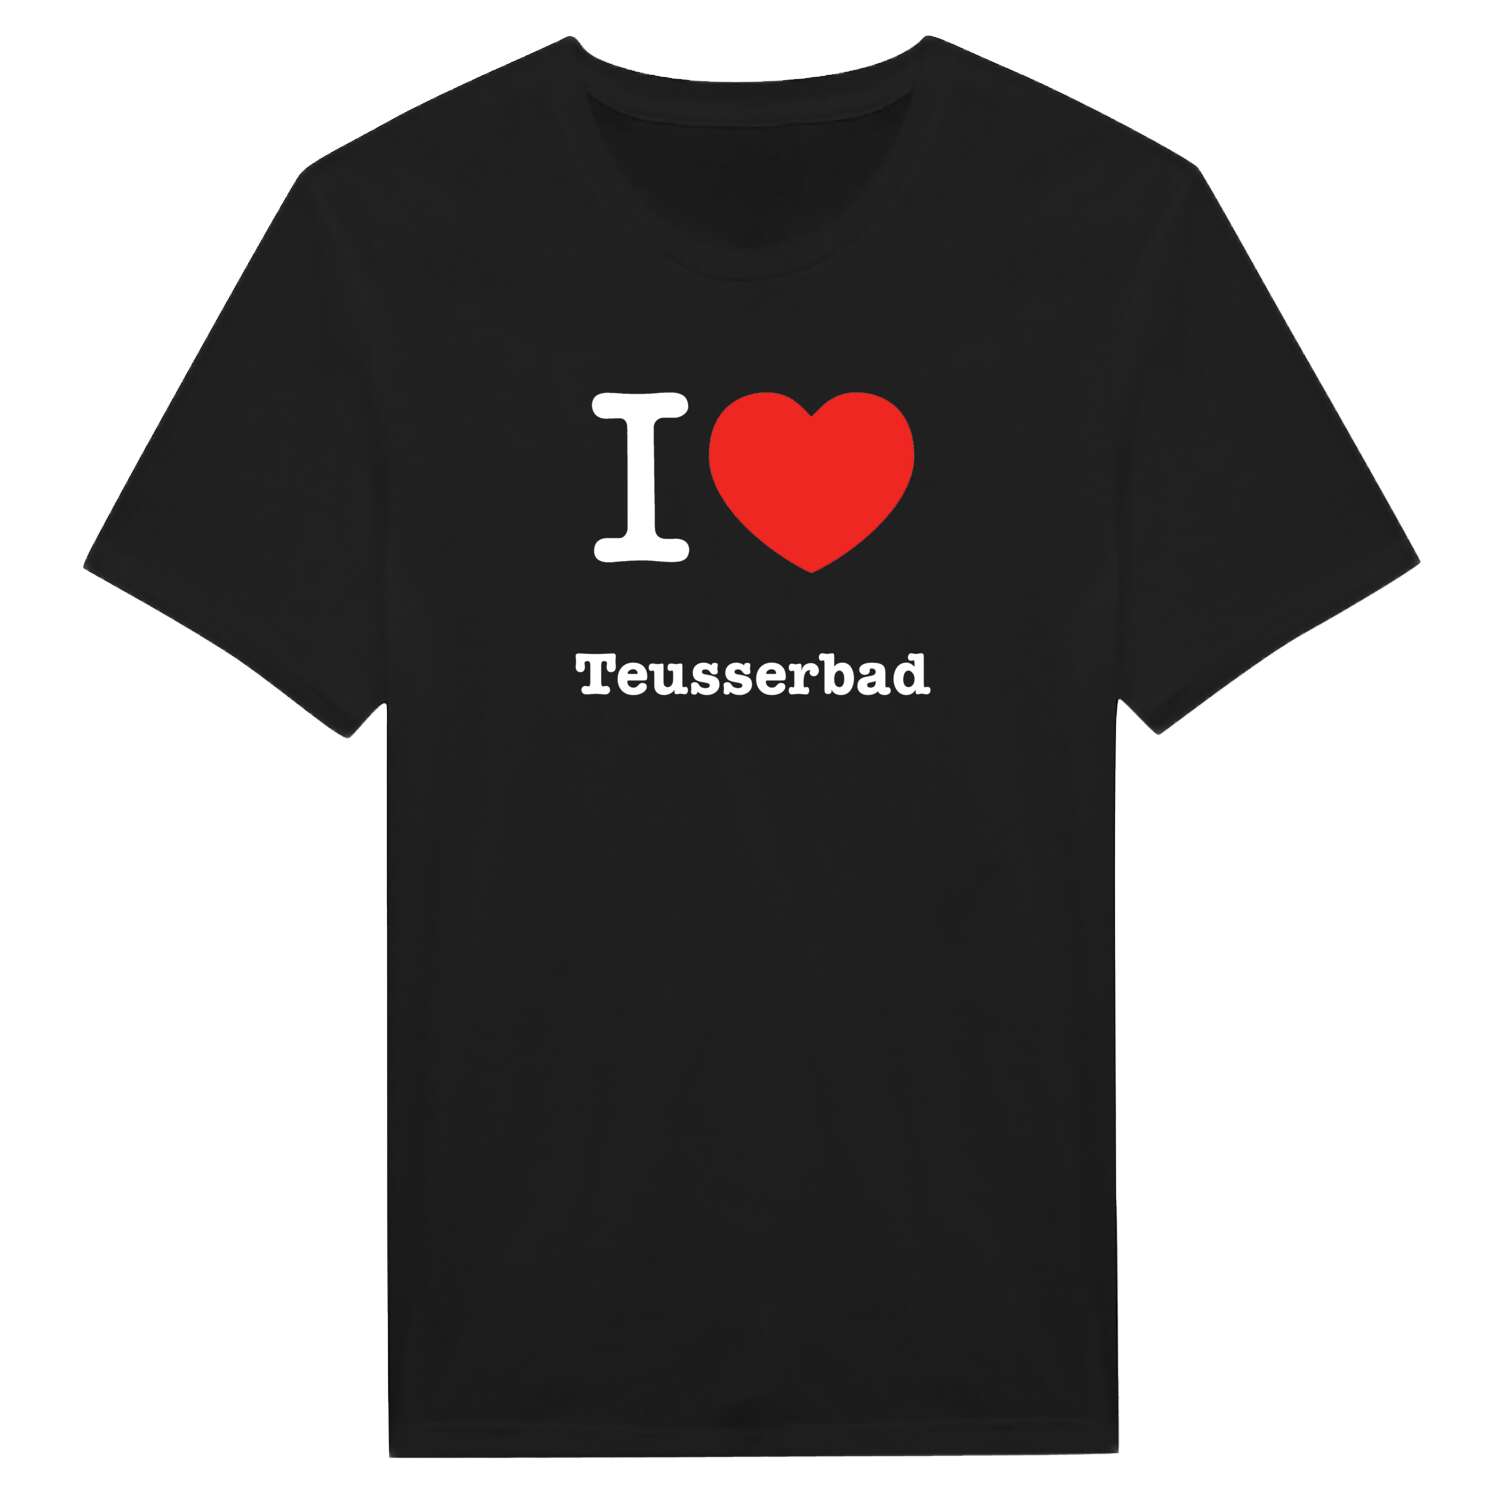 Teusserbad T-Shirt »I love«